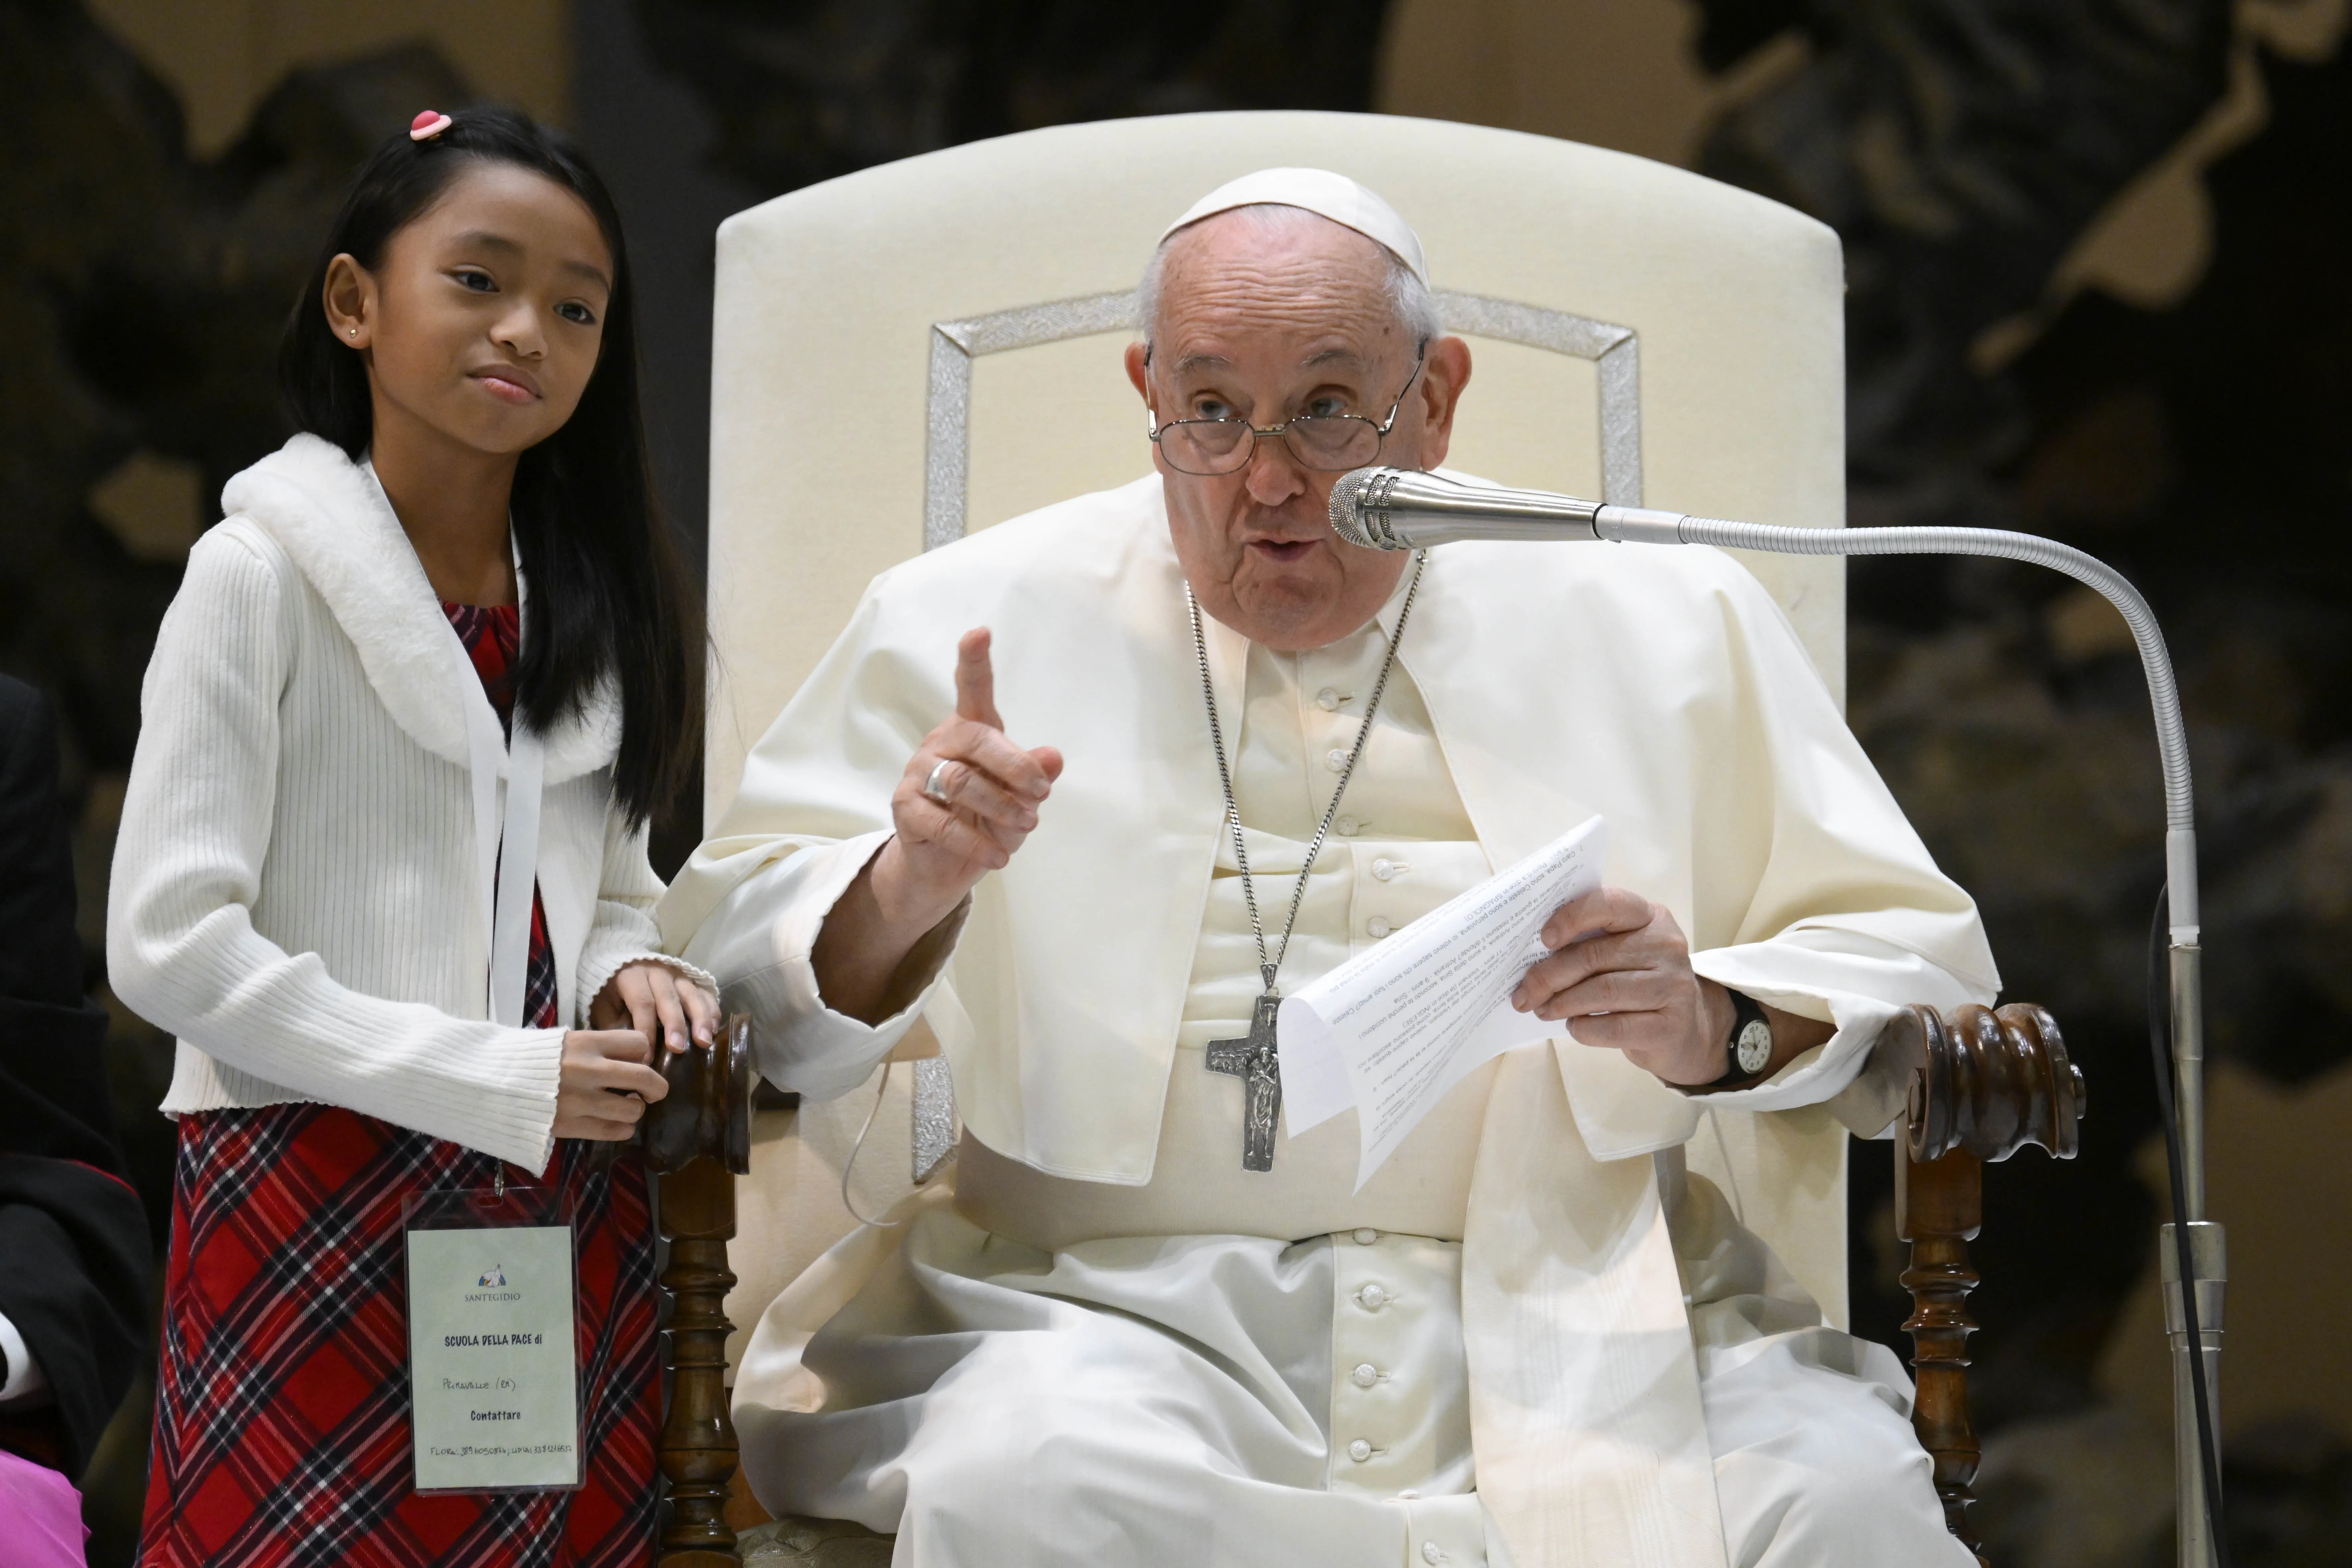 Pope Francis to Young People: "Christ is alive and he wants you to be alive!"